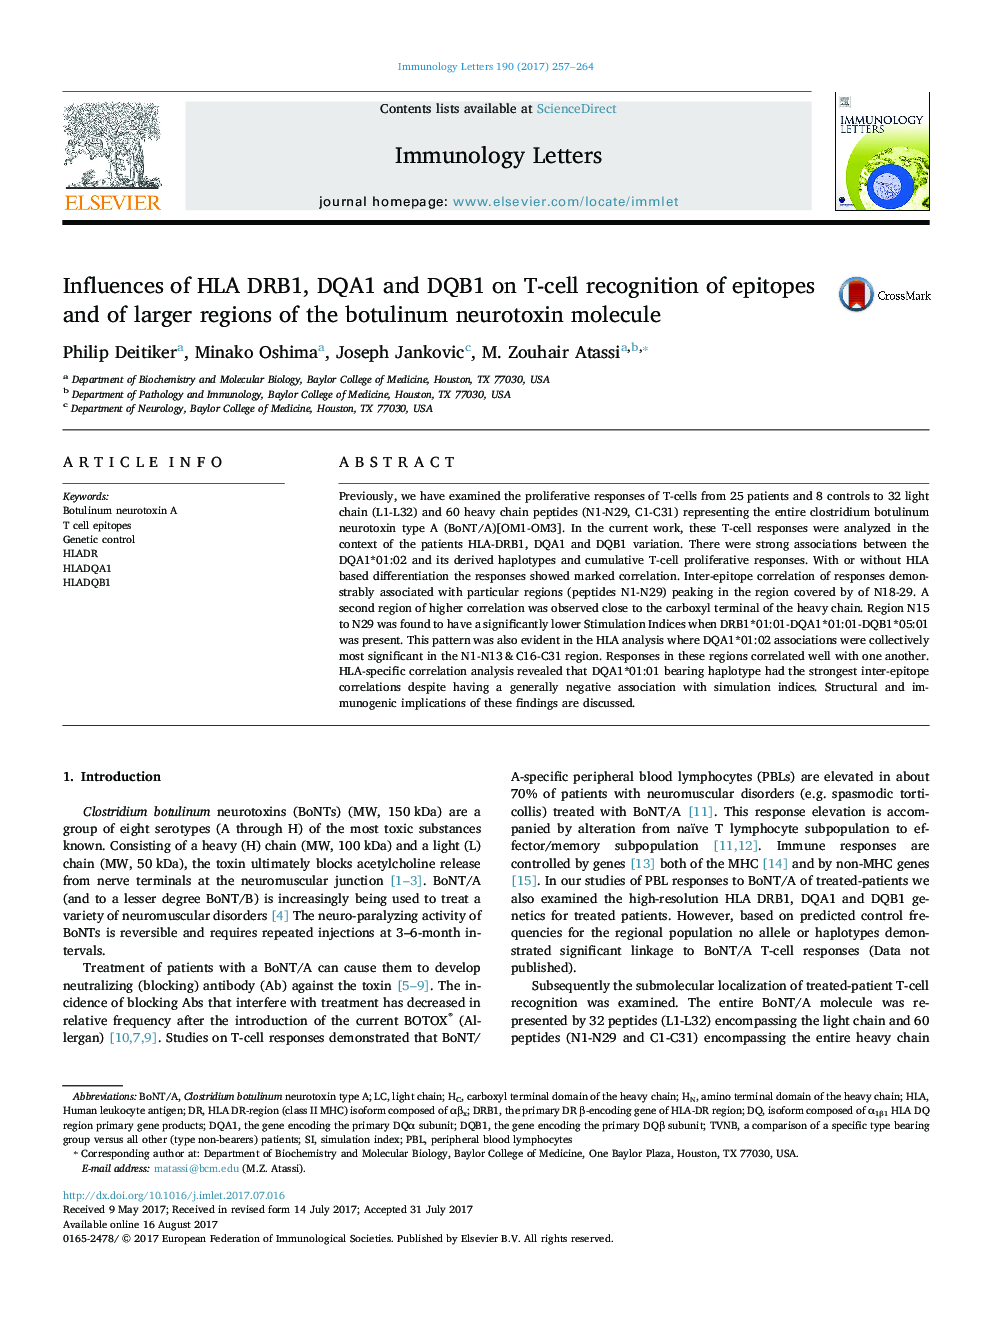 Influences of HLA DRB1, DQA1 and DQB1 on T-cell recognition of epitopes and of larger regions of the botulinum neurotoxin molecule